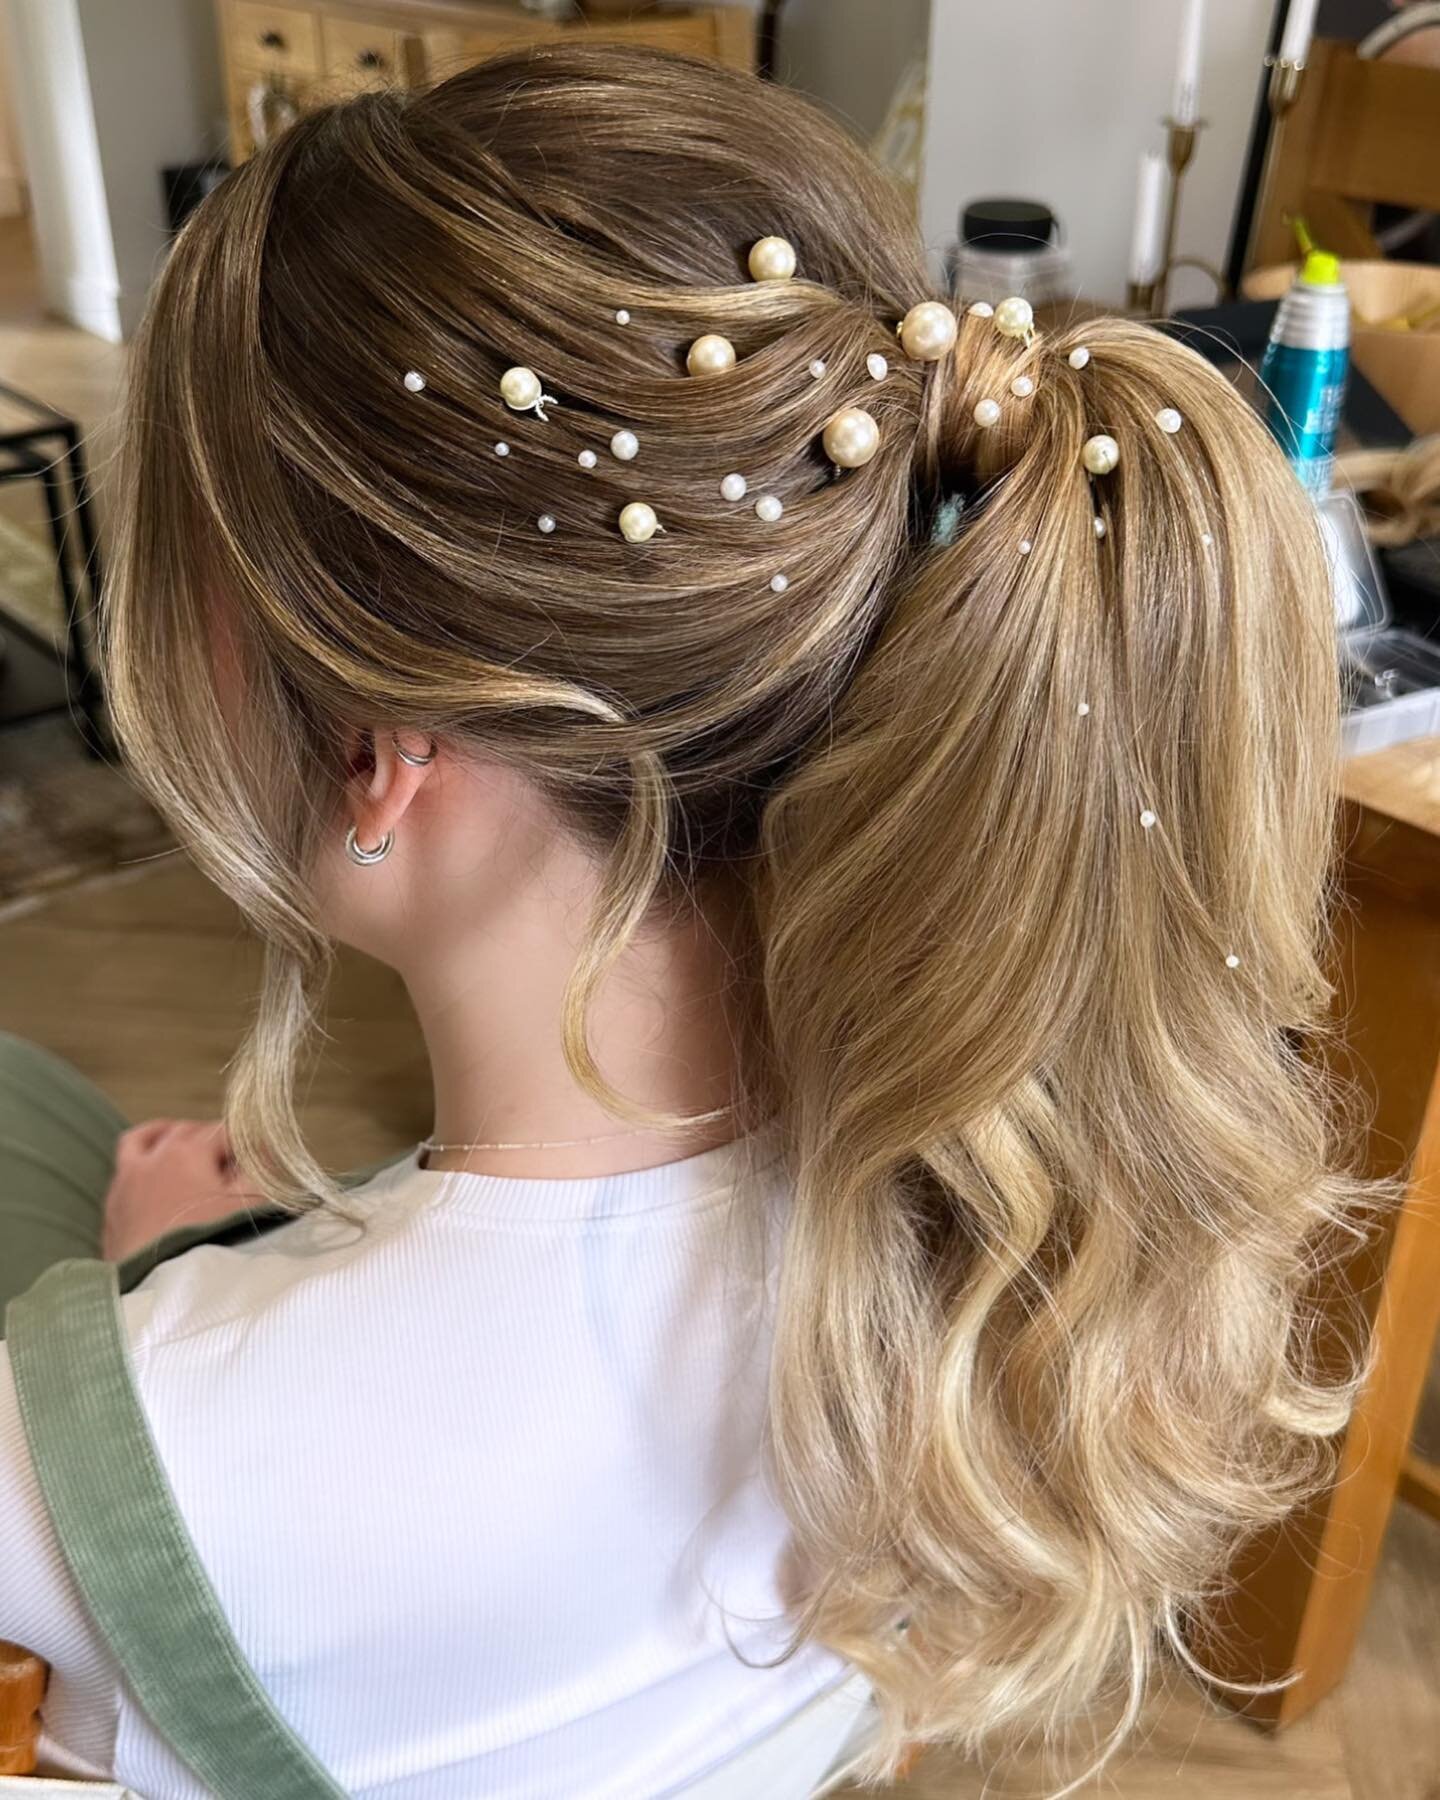 I can&rsquo;t wait to bring this style to life again on my lovely brides wedding day 💖

#manchesterhair #manchesterhairdresser #manchesterhairstylist #manchesterhairdressers #manchesterhairstylists #manchesterbridalhair #manchesterbridalhairstylist 